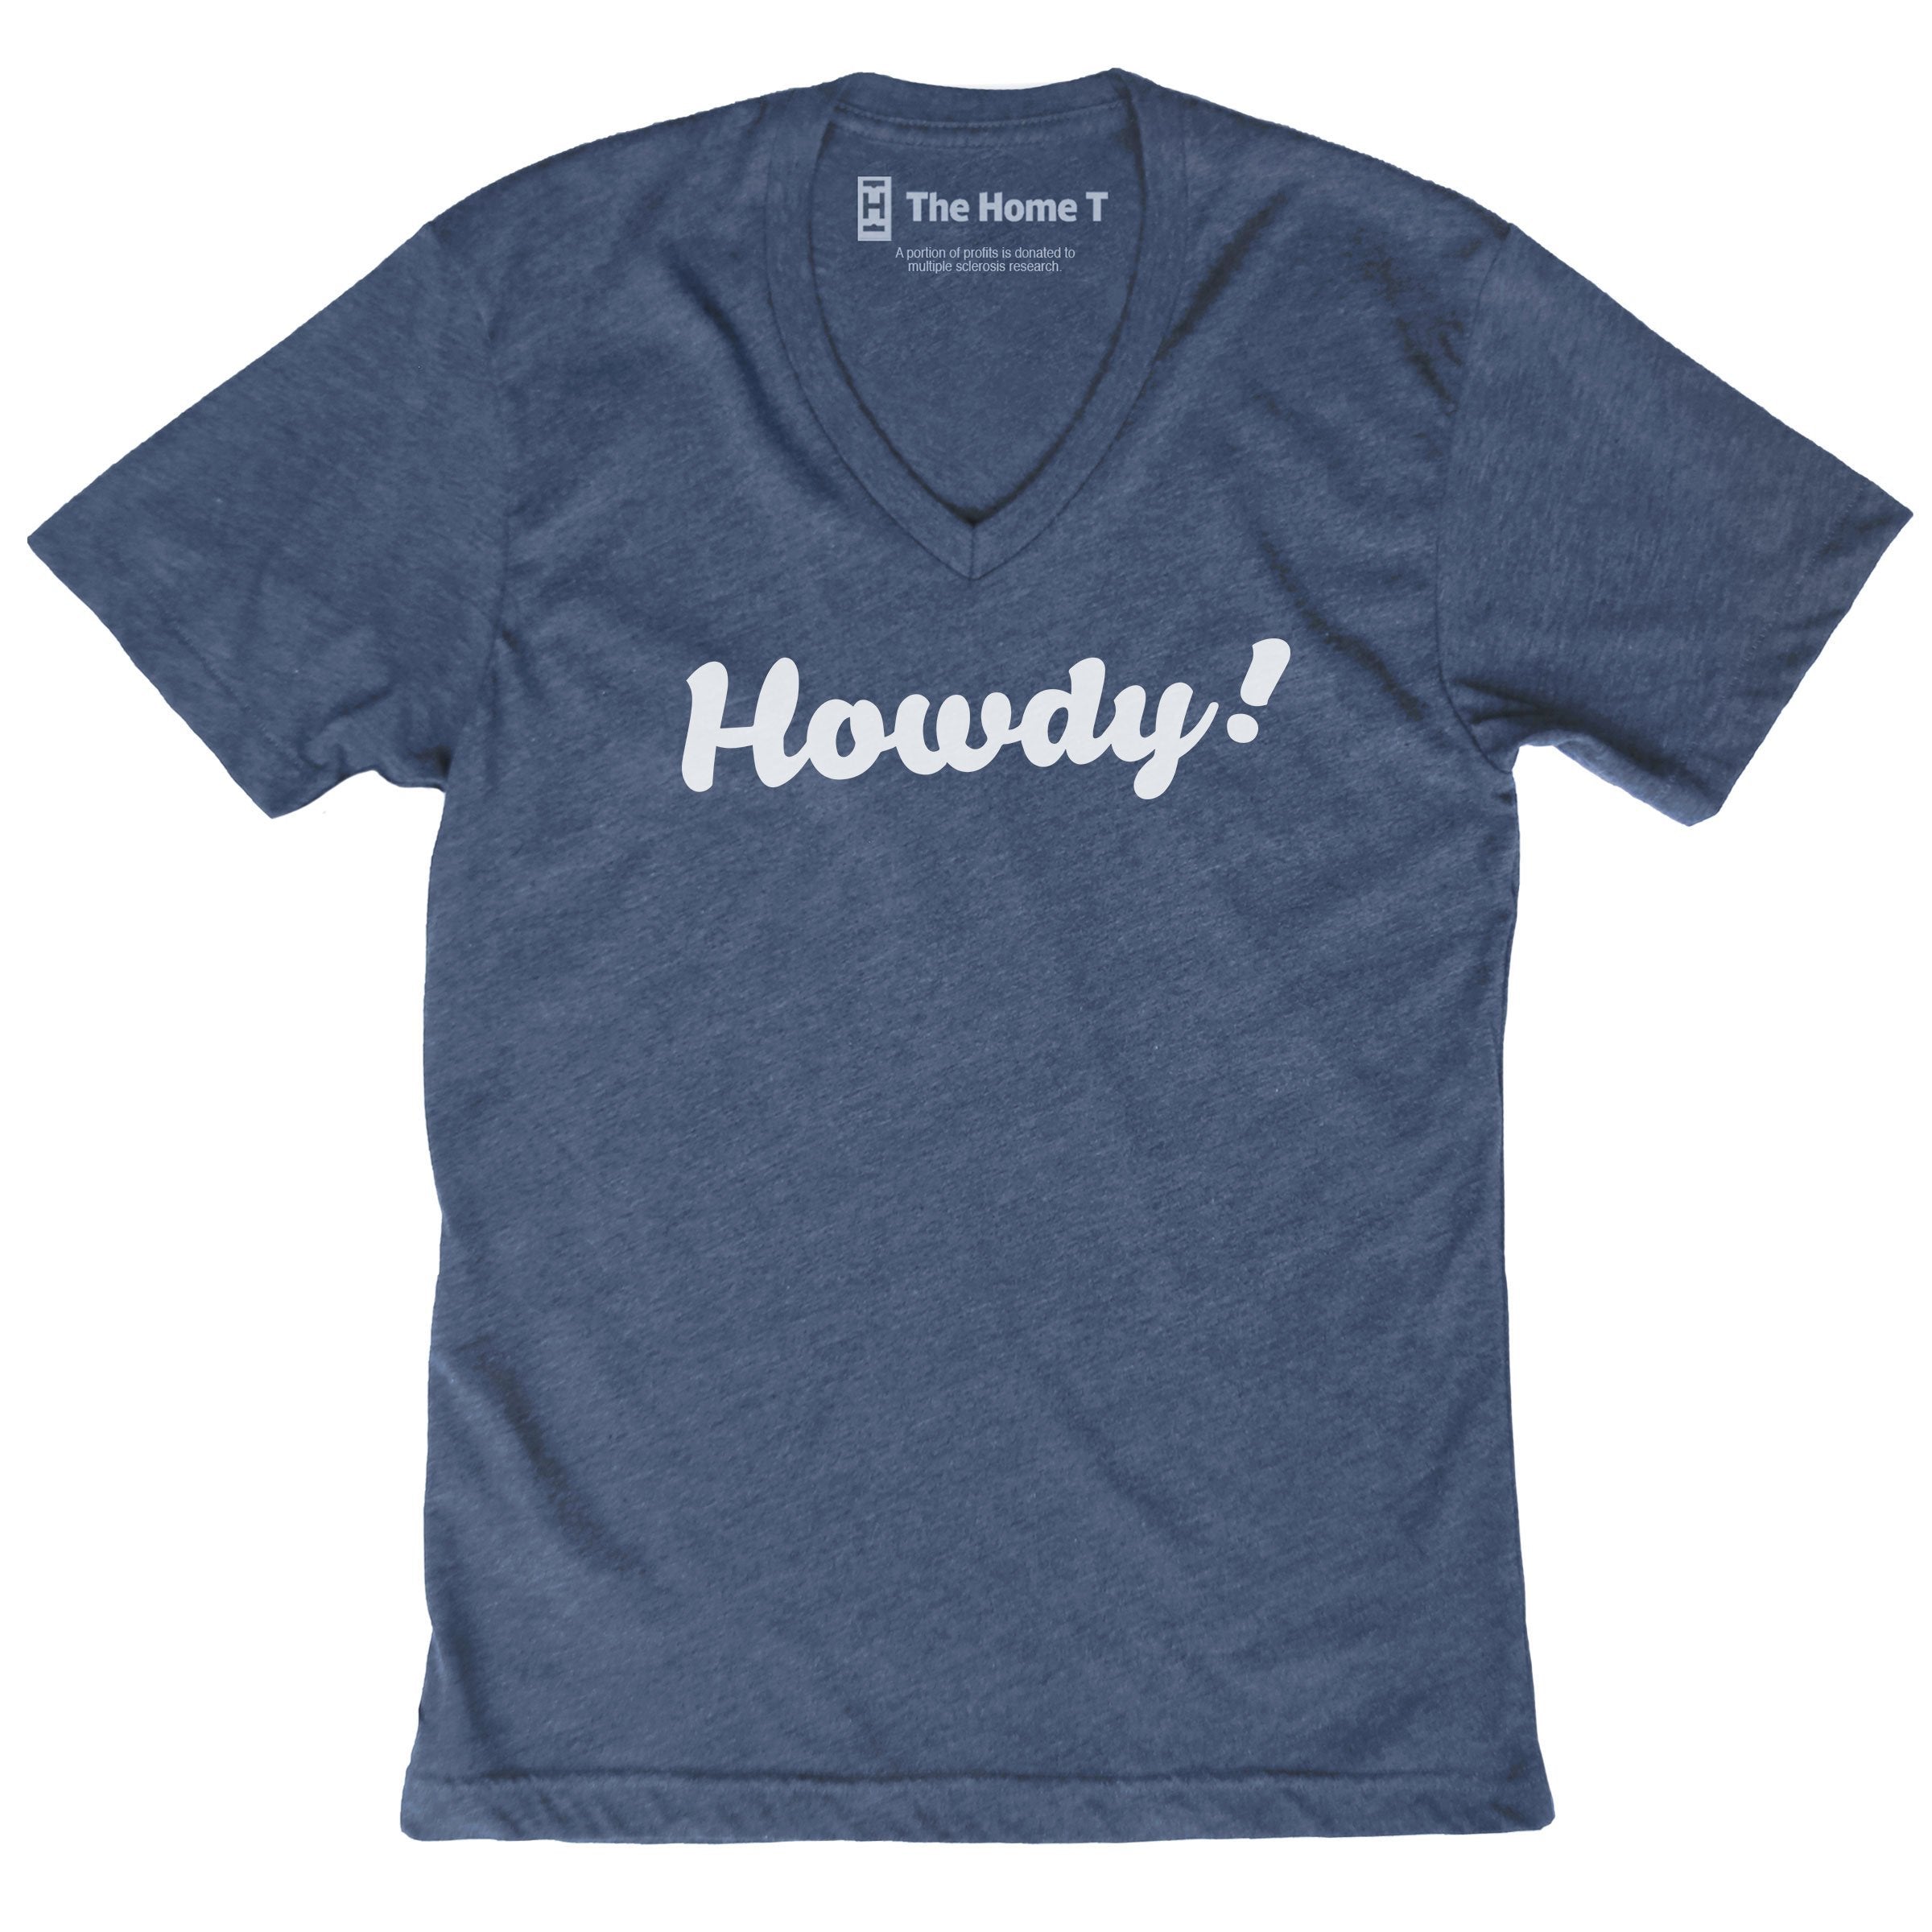 Howdy! Crew neck The Home T XS Navy V-Neck T-Shirt